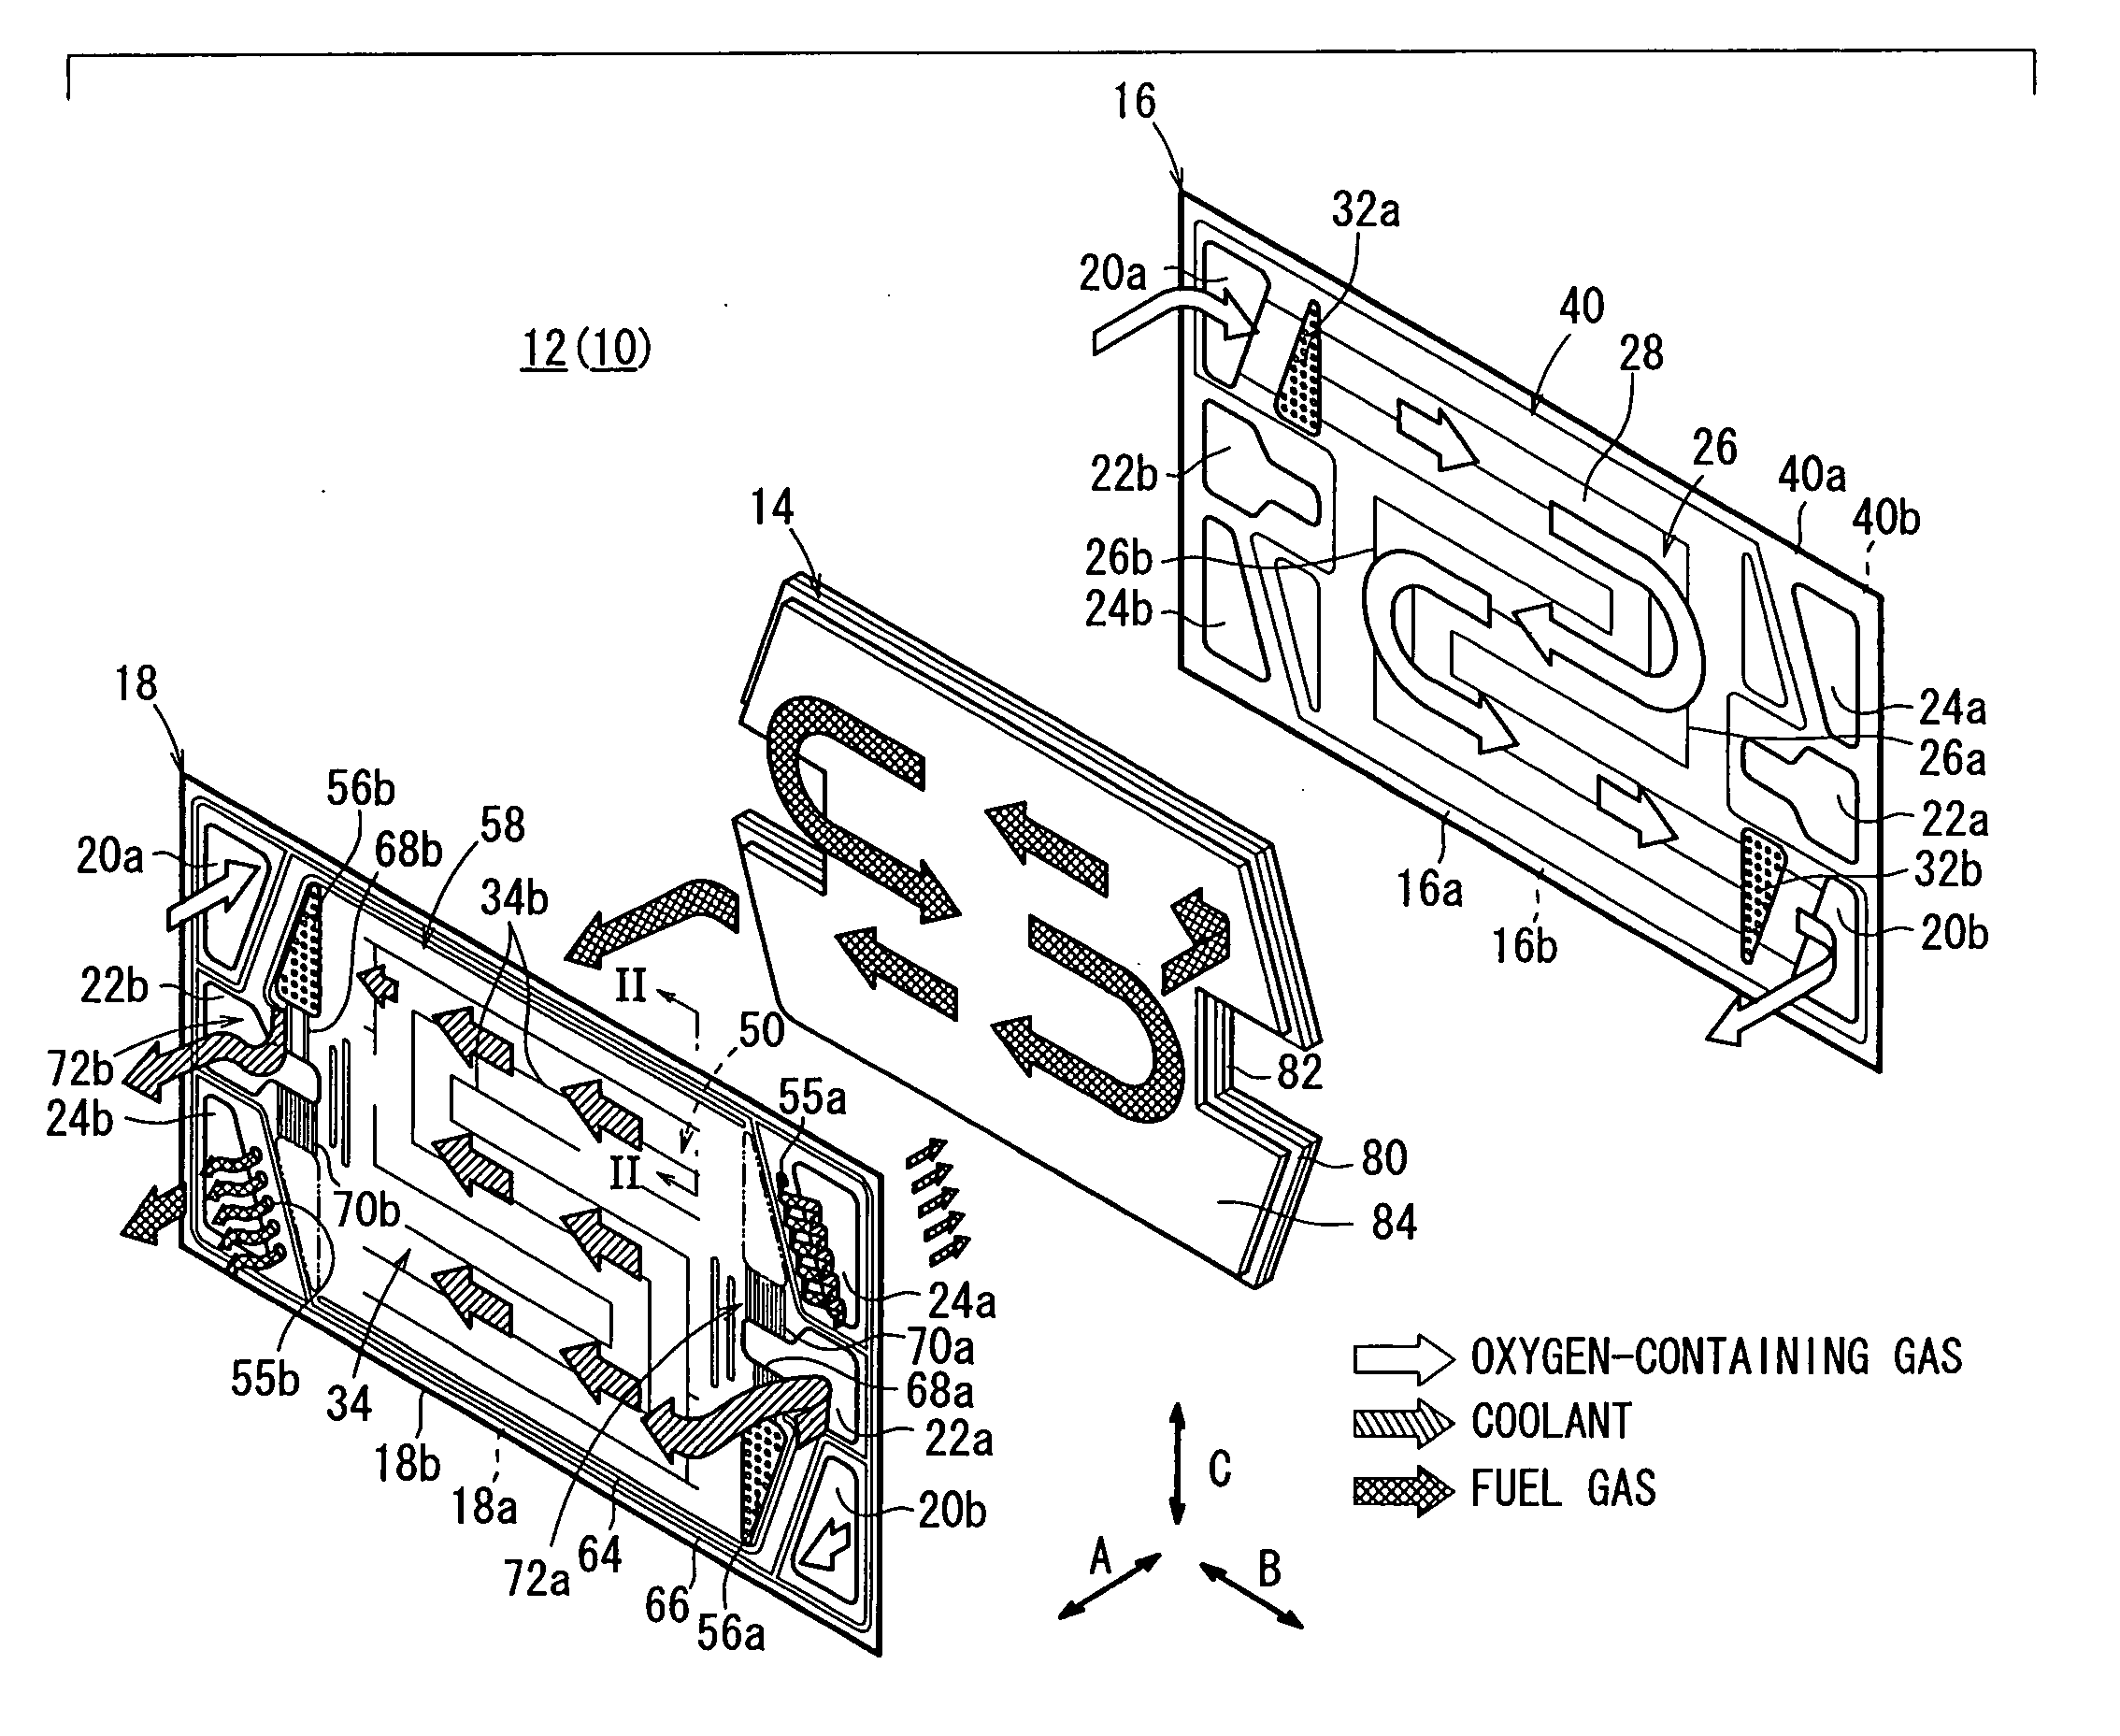 Fuel cell and metal separator for fuel cell